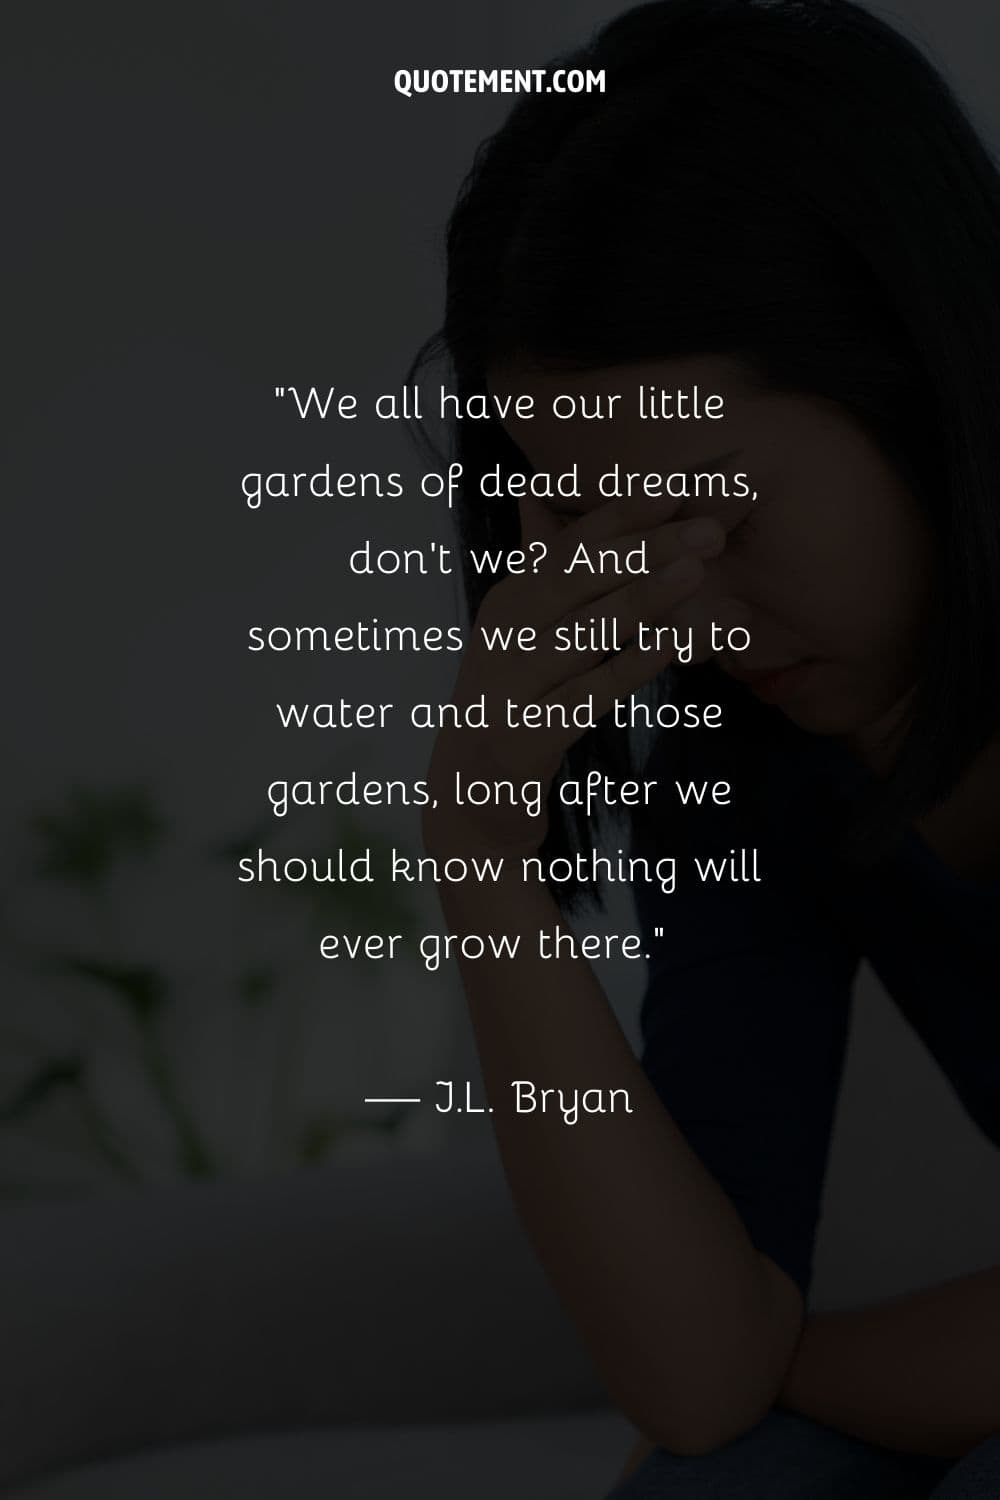 And sometimes we still try to water and tend those gardens, long after we should know nothing will ever grow there